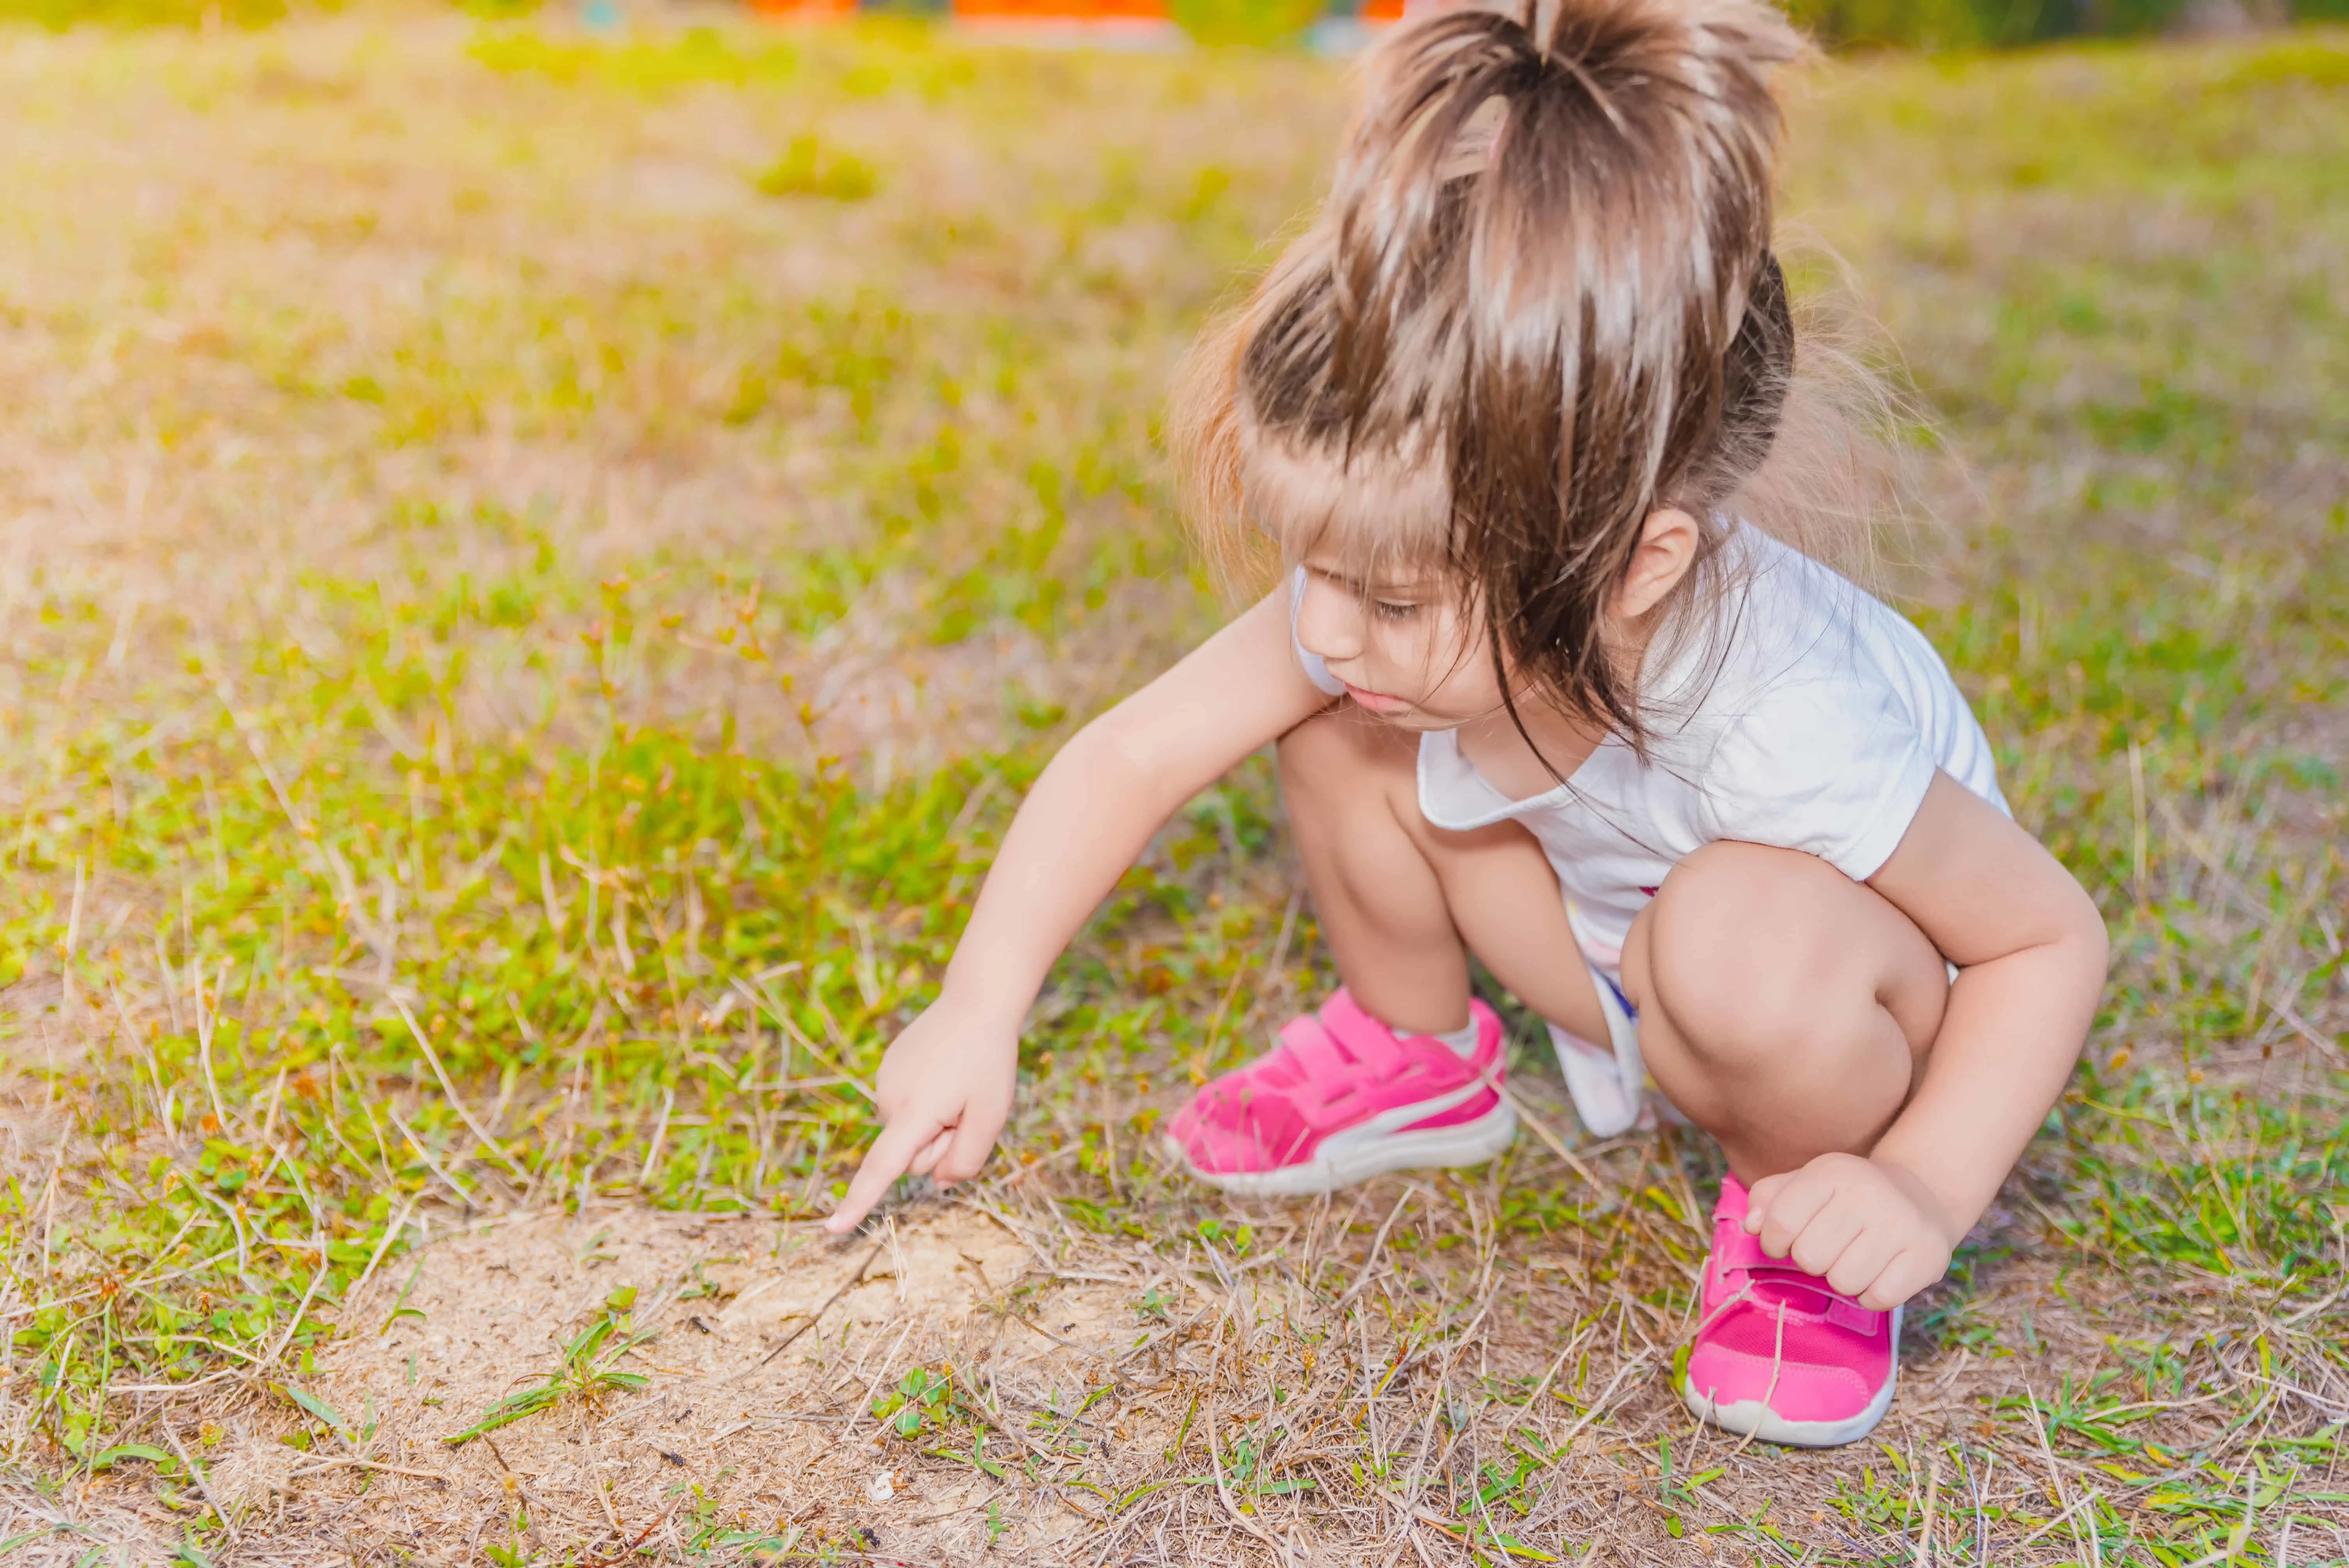 Best bug activities for toddlers that promote learning.